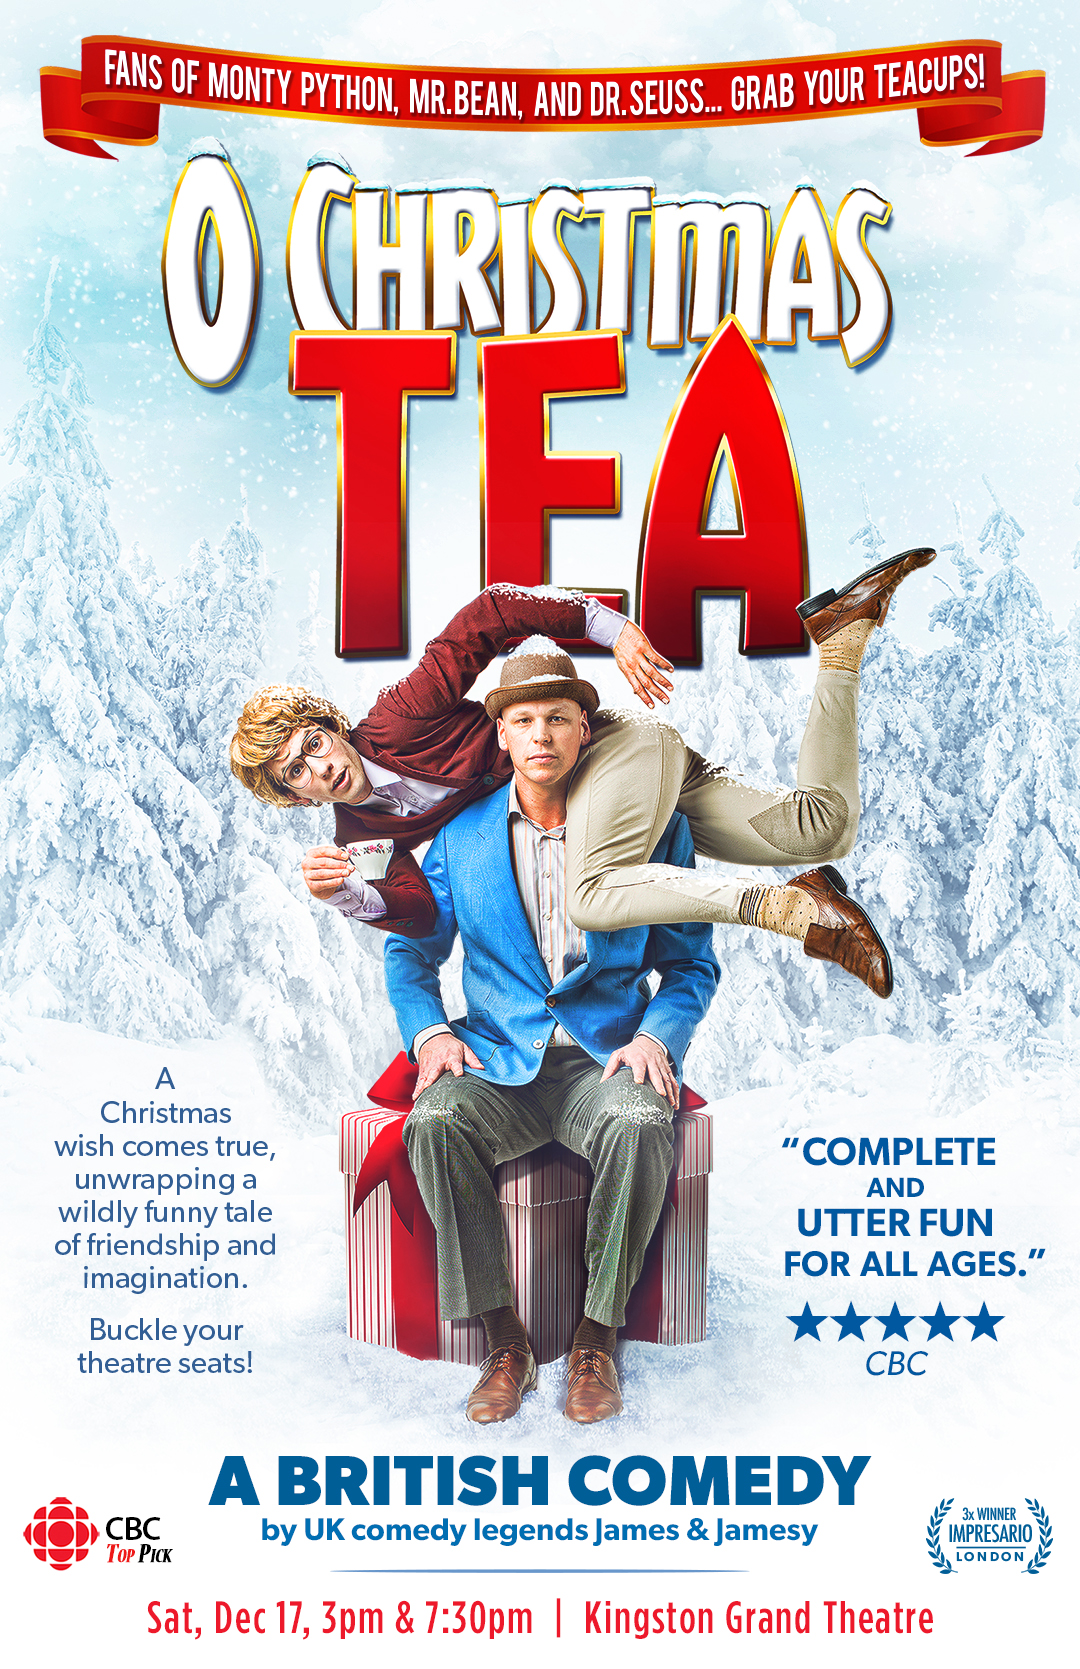 One man sits on a giftbox. A second man lies on his shoulders holding a teacup. The background is snow-covered trees. On a banner above, text reads "FANS OF MONTY PYTHON, MR. BEAN, AND DR. SEUSS... GRAB YOUR TEACUPS!" Below that reads "O CHRISTMAS TEA," and below that reads "A Christmas wish comes true, unwrapping a wildly funny tale of friendship and imagination. Buckle your seats!" Next to this reads ""COMPLETE AND UTTER FUN FOR ALL AGES." CBC," and below this reads "A BRITISH COMEDY by UK comedy legends James & Jamesy," "Sat, Dec 17, 3pm & 7:30pm | Kingston Grand Theatre"